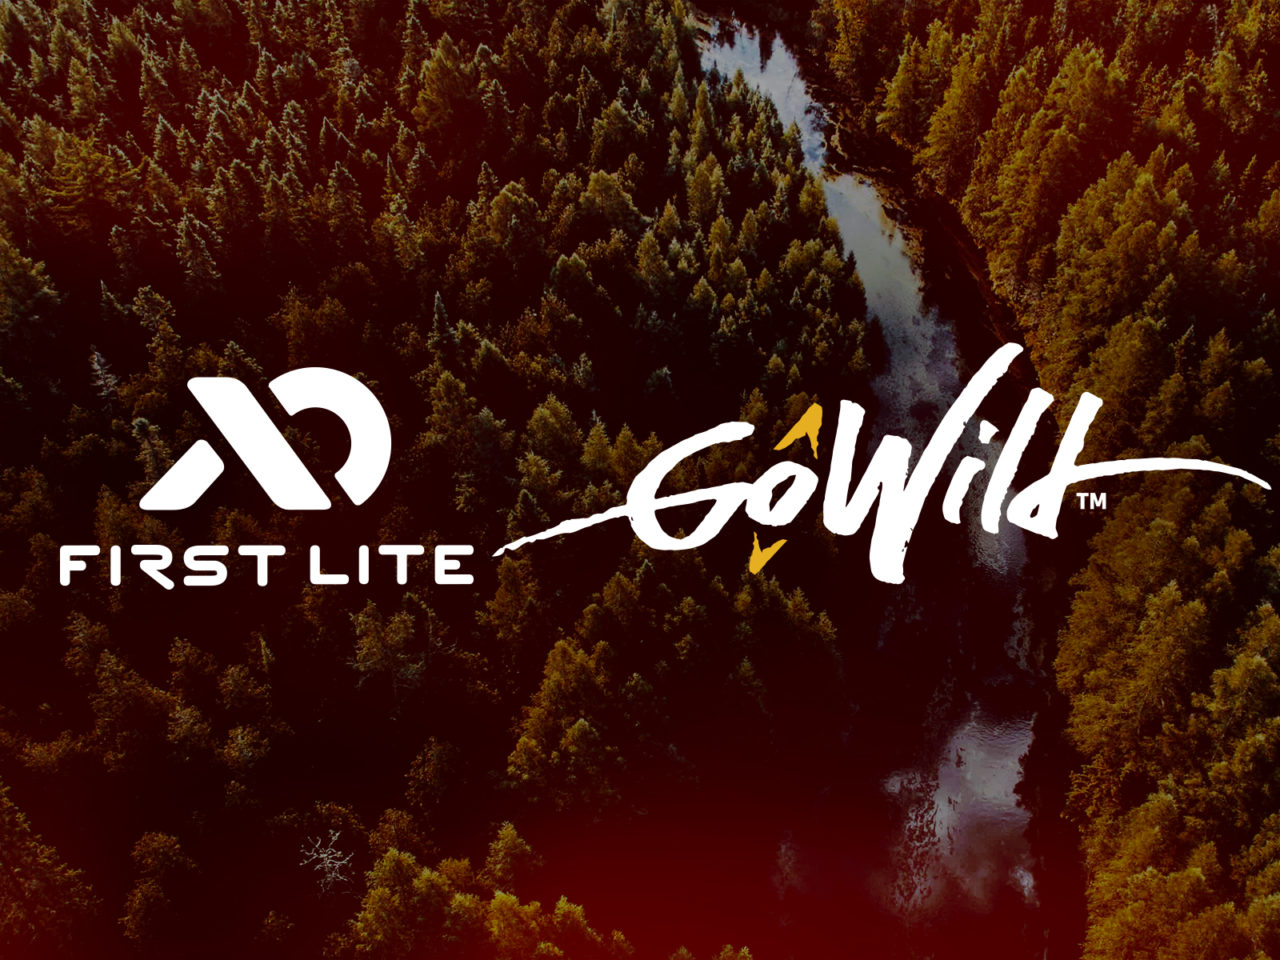 First Lite Announces Partnership with GoWild, a Social Media & Activity Tracking Platform